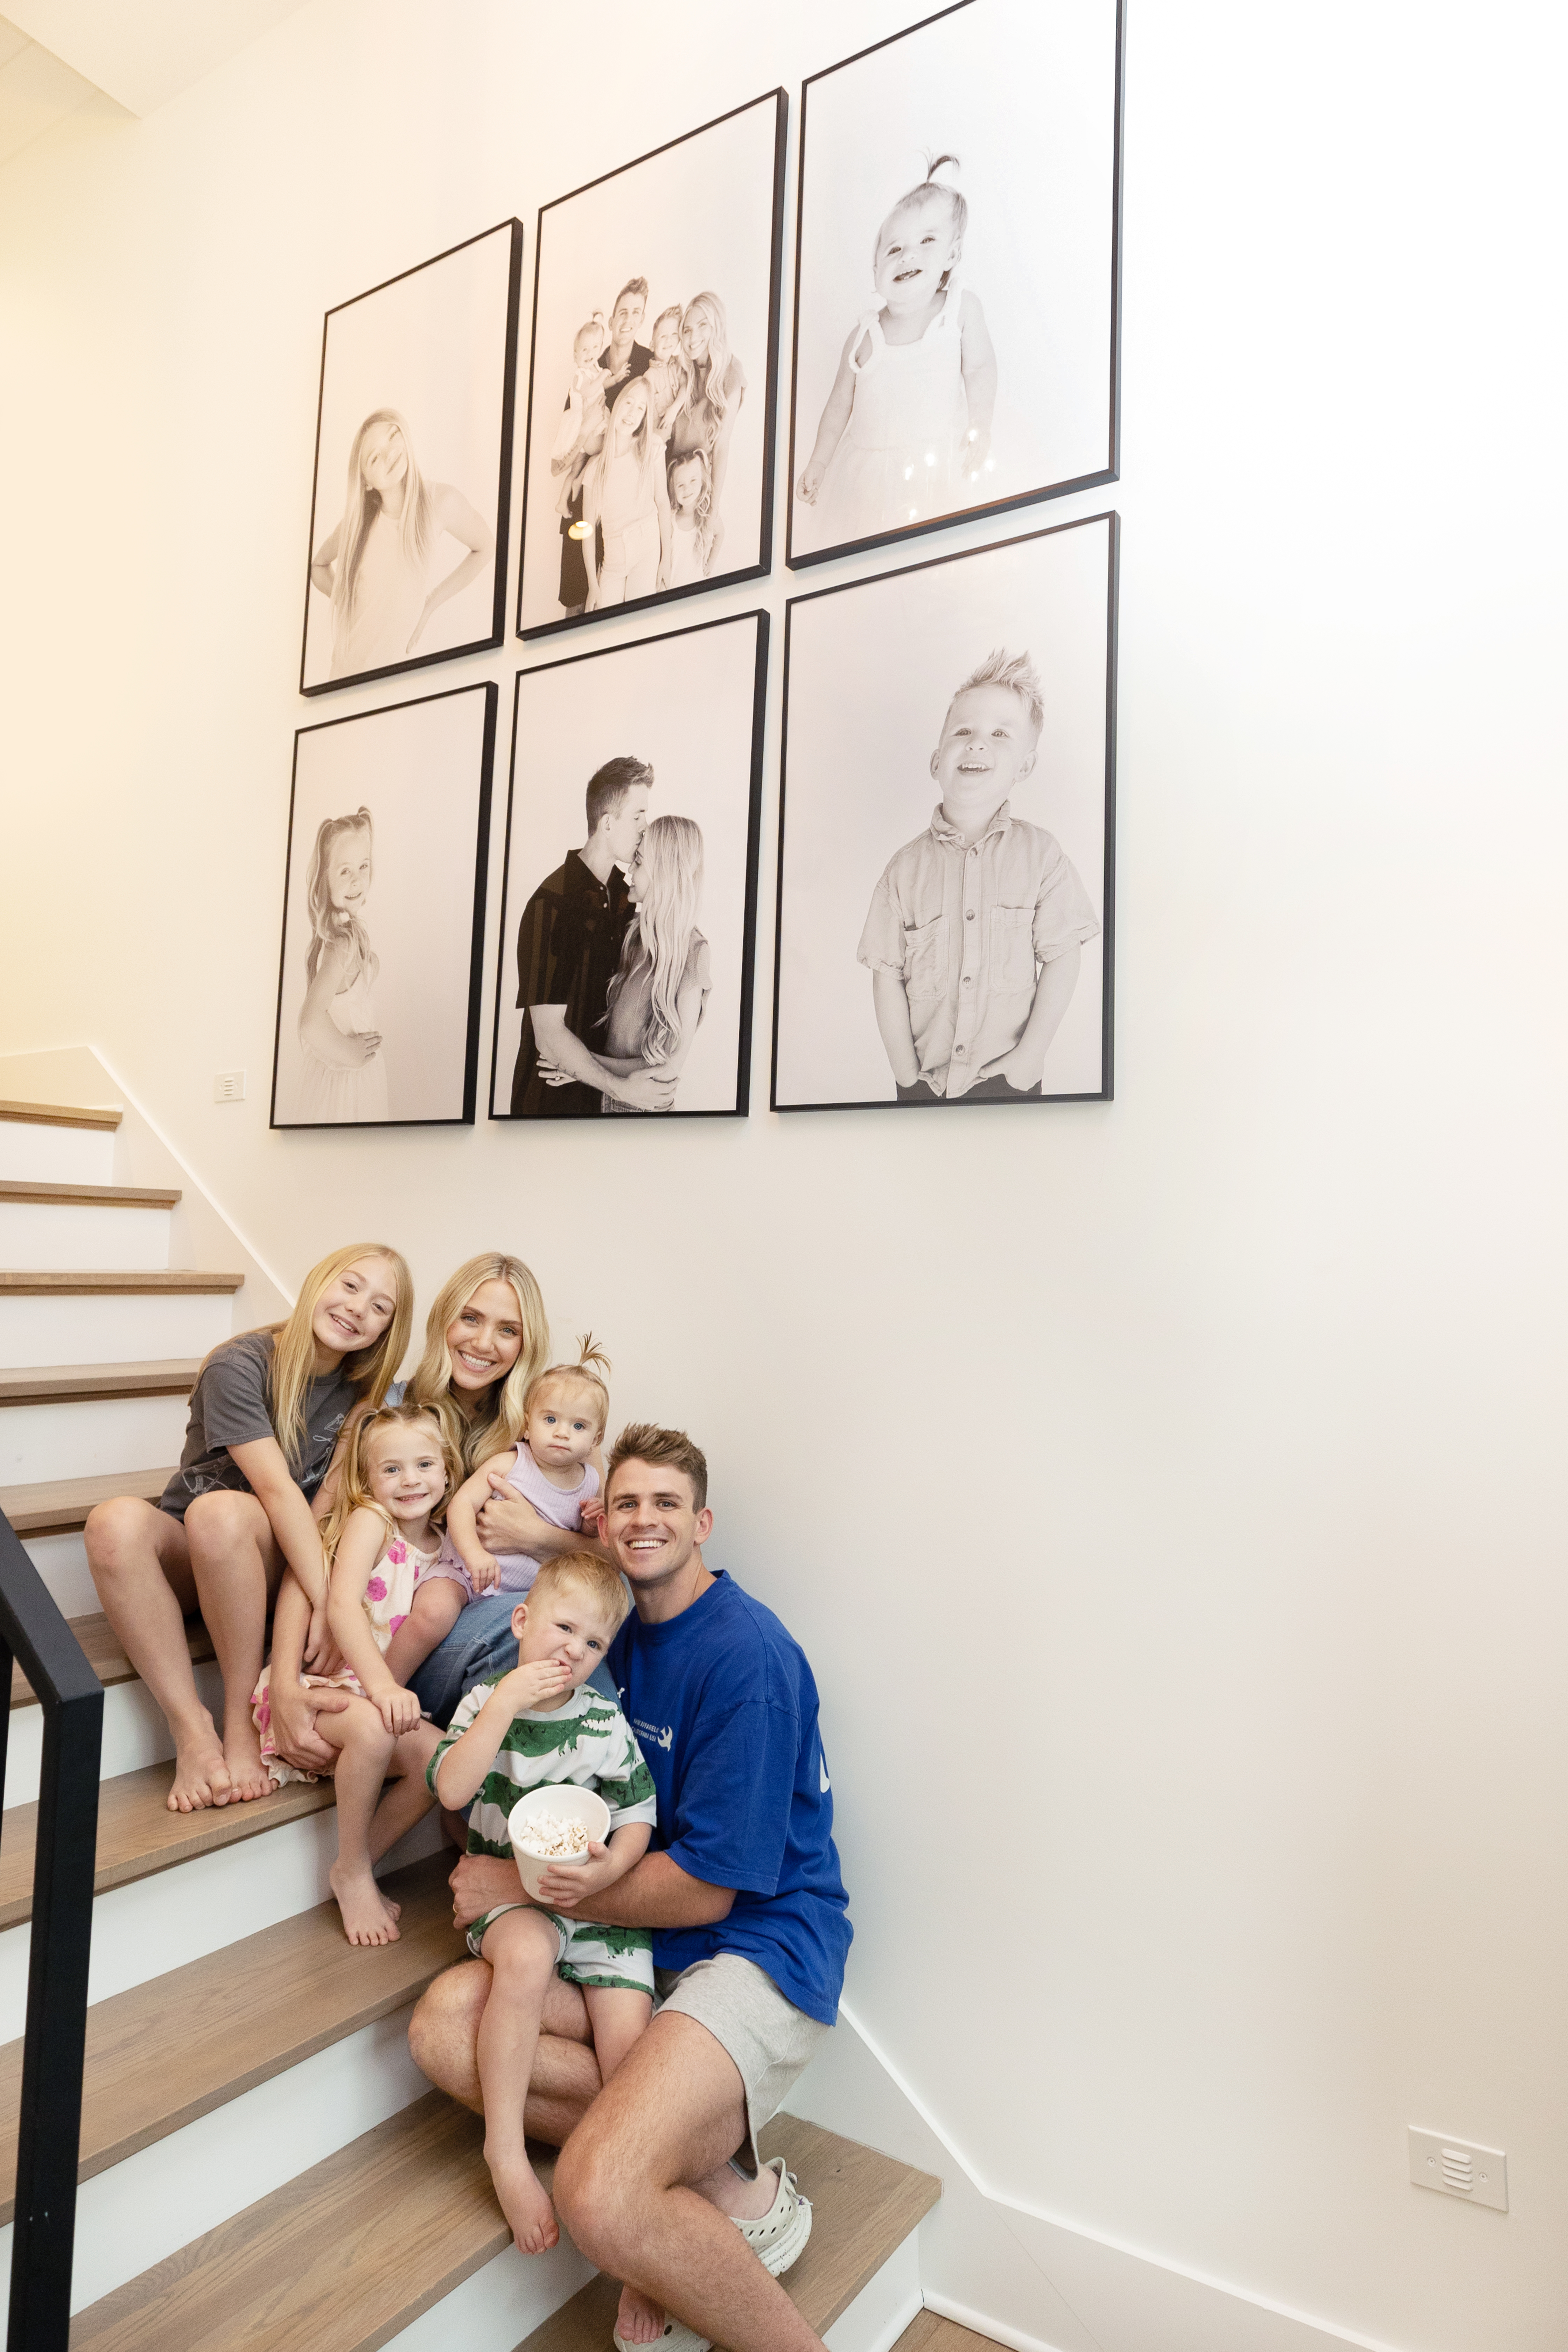 At Home Photoshoot: Family portraits framed above a staircase.